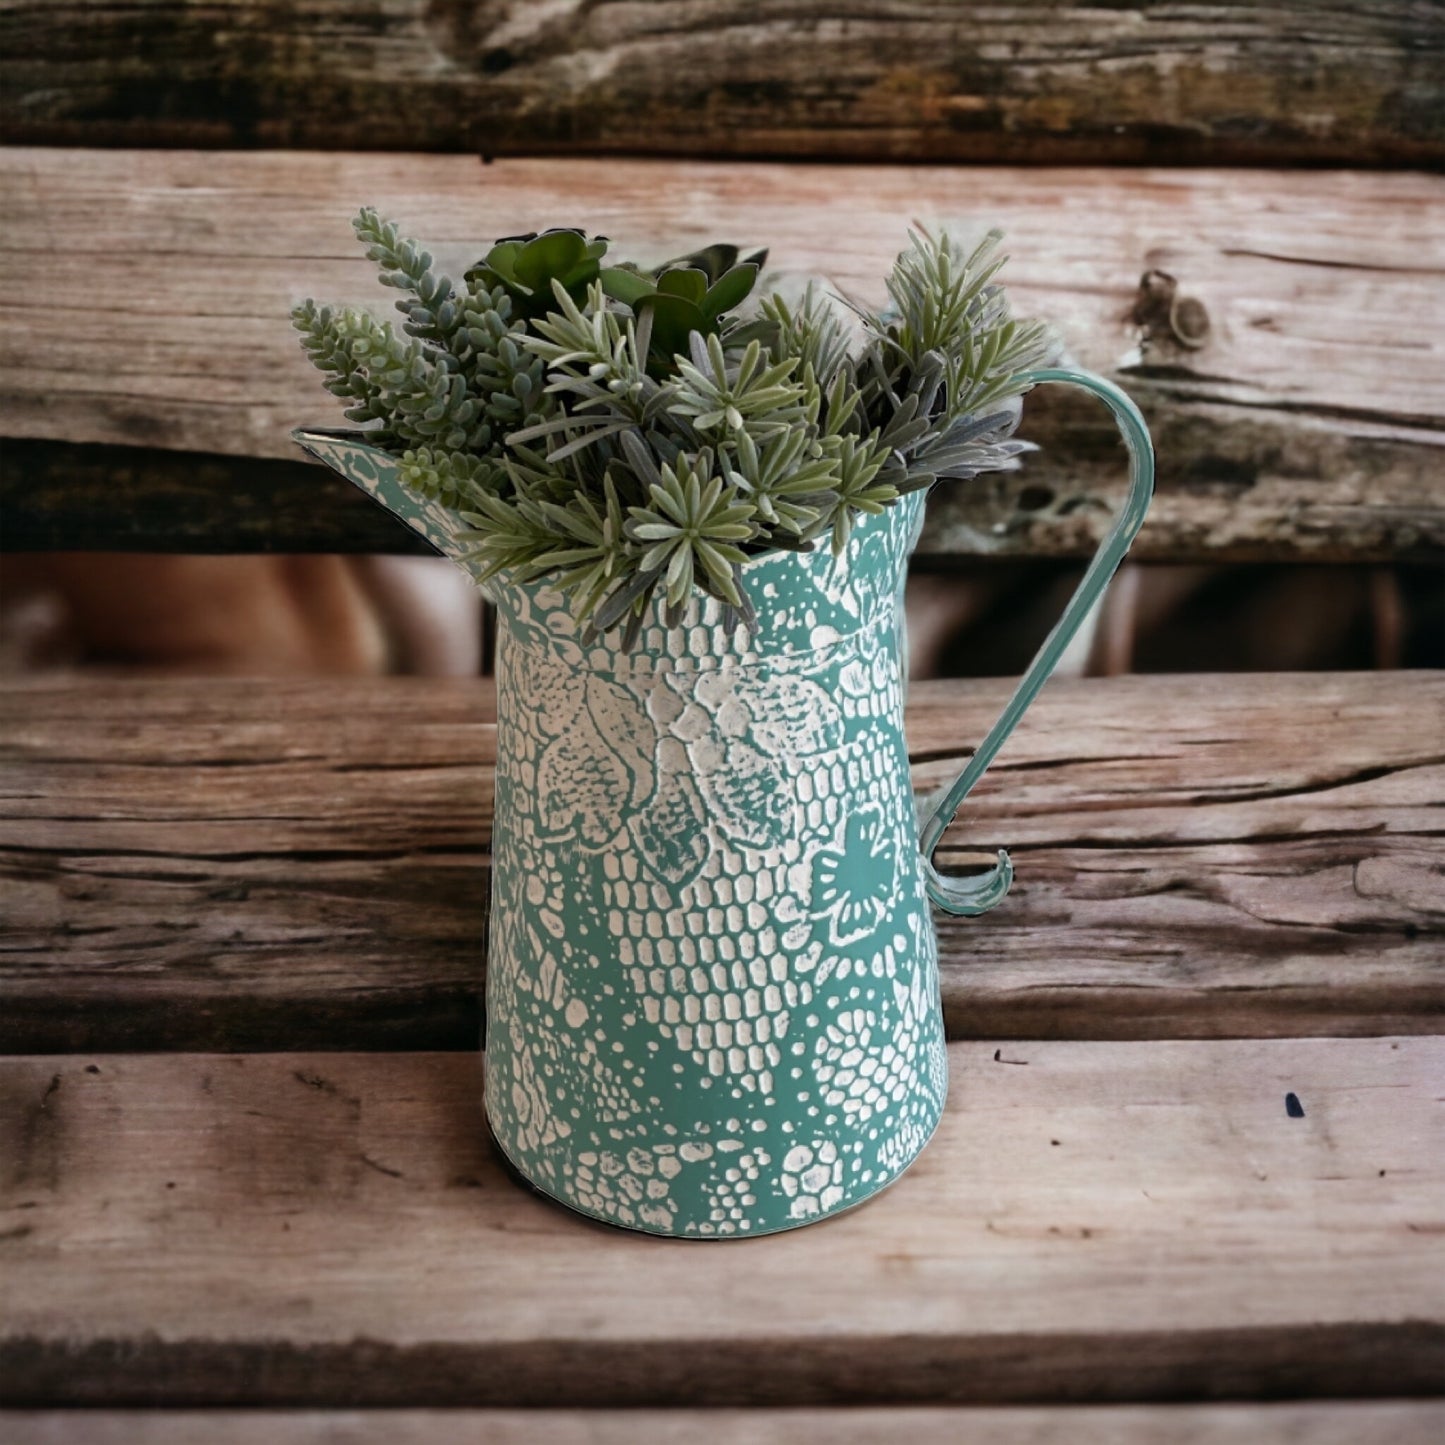 Planter Wall Large Jug or Vase Hanging - The Renmy Store Homewares & Gifts 